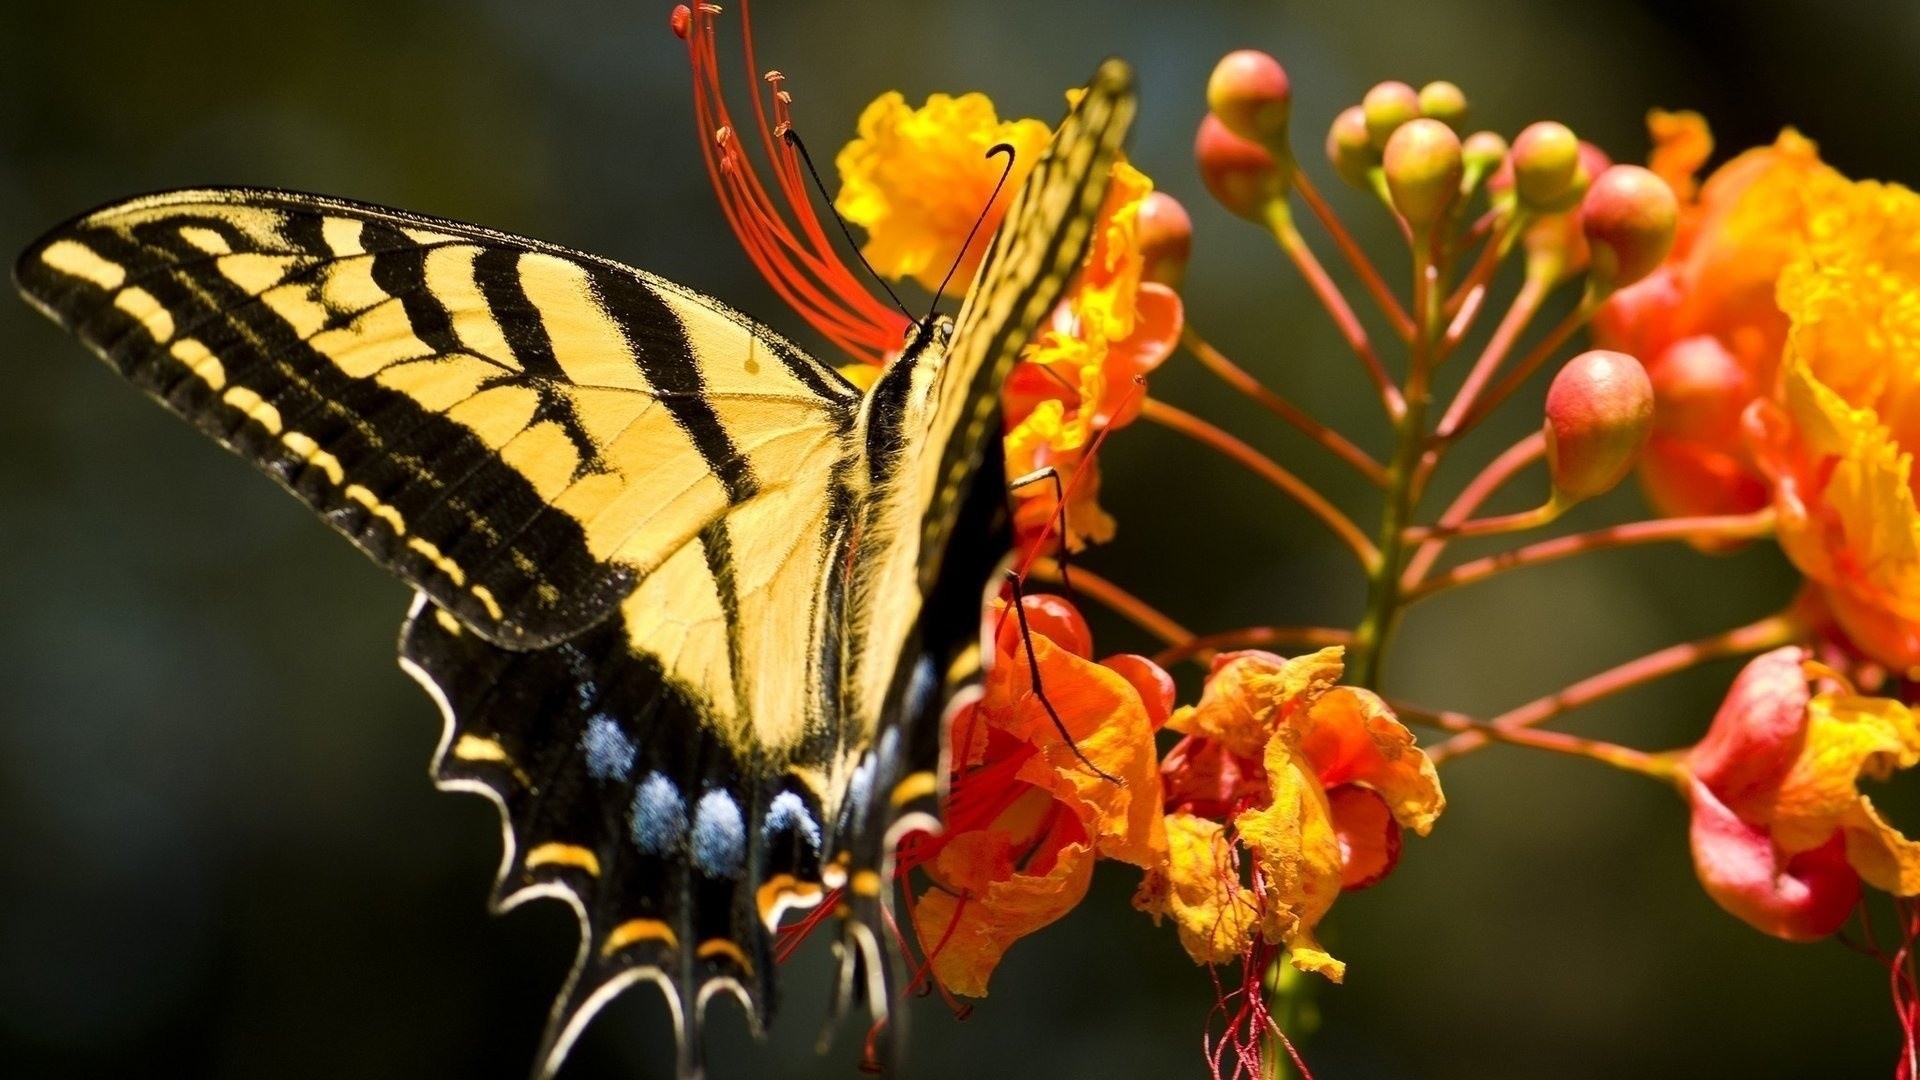 General 1920x1080 butterfly insect flowers orange flowers closeup colorful animals plants